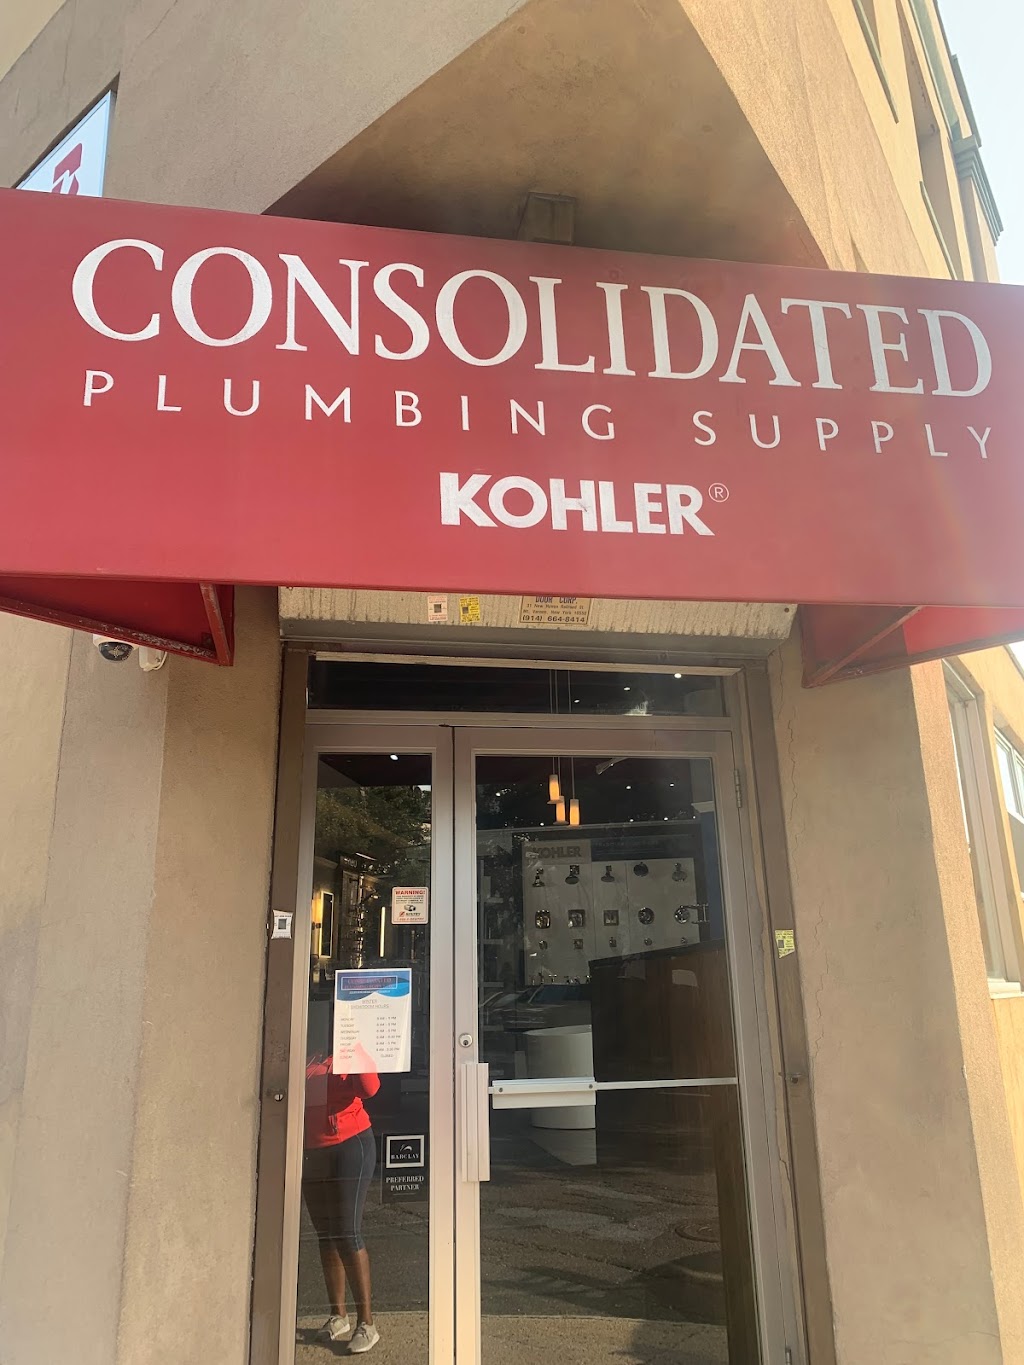 Consolidated Plumbing Supply | 121 Stevens Ave, Mt Vernon, NY 10550 | Phone: (914) 668-3124